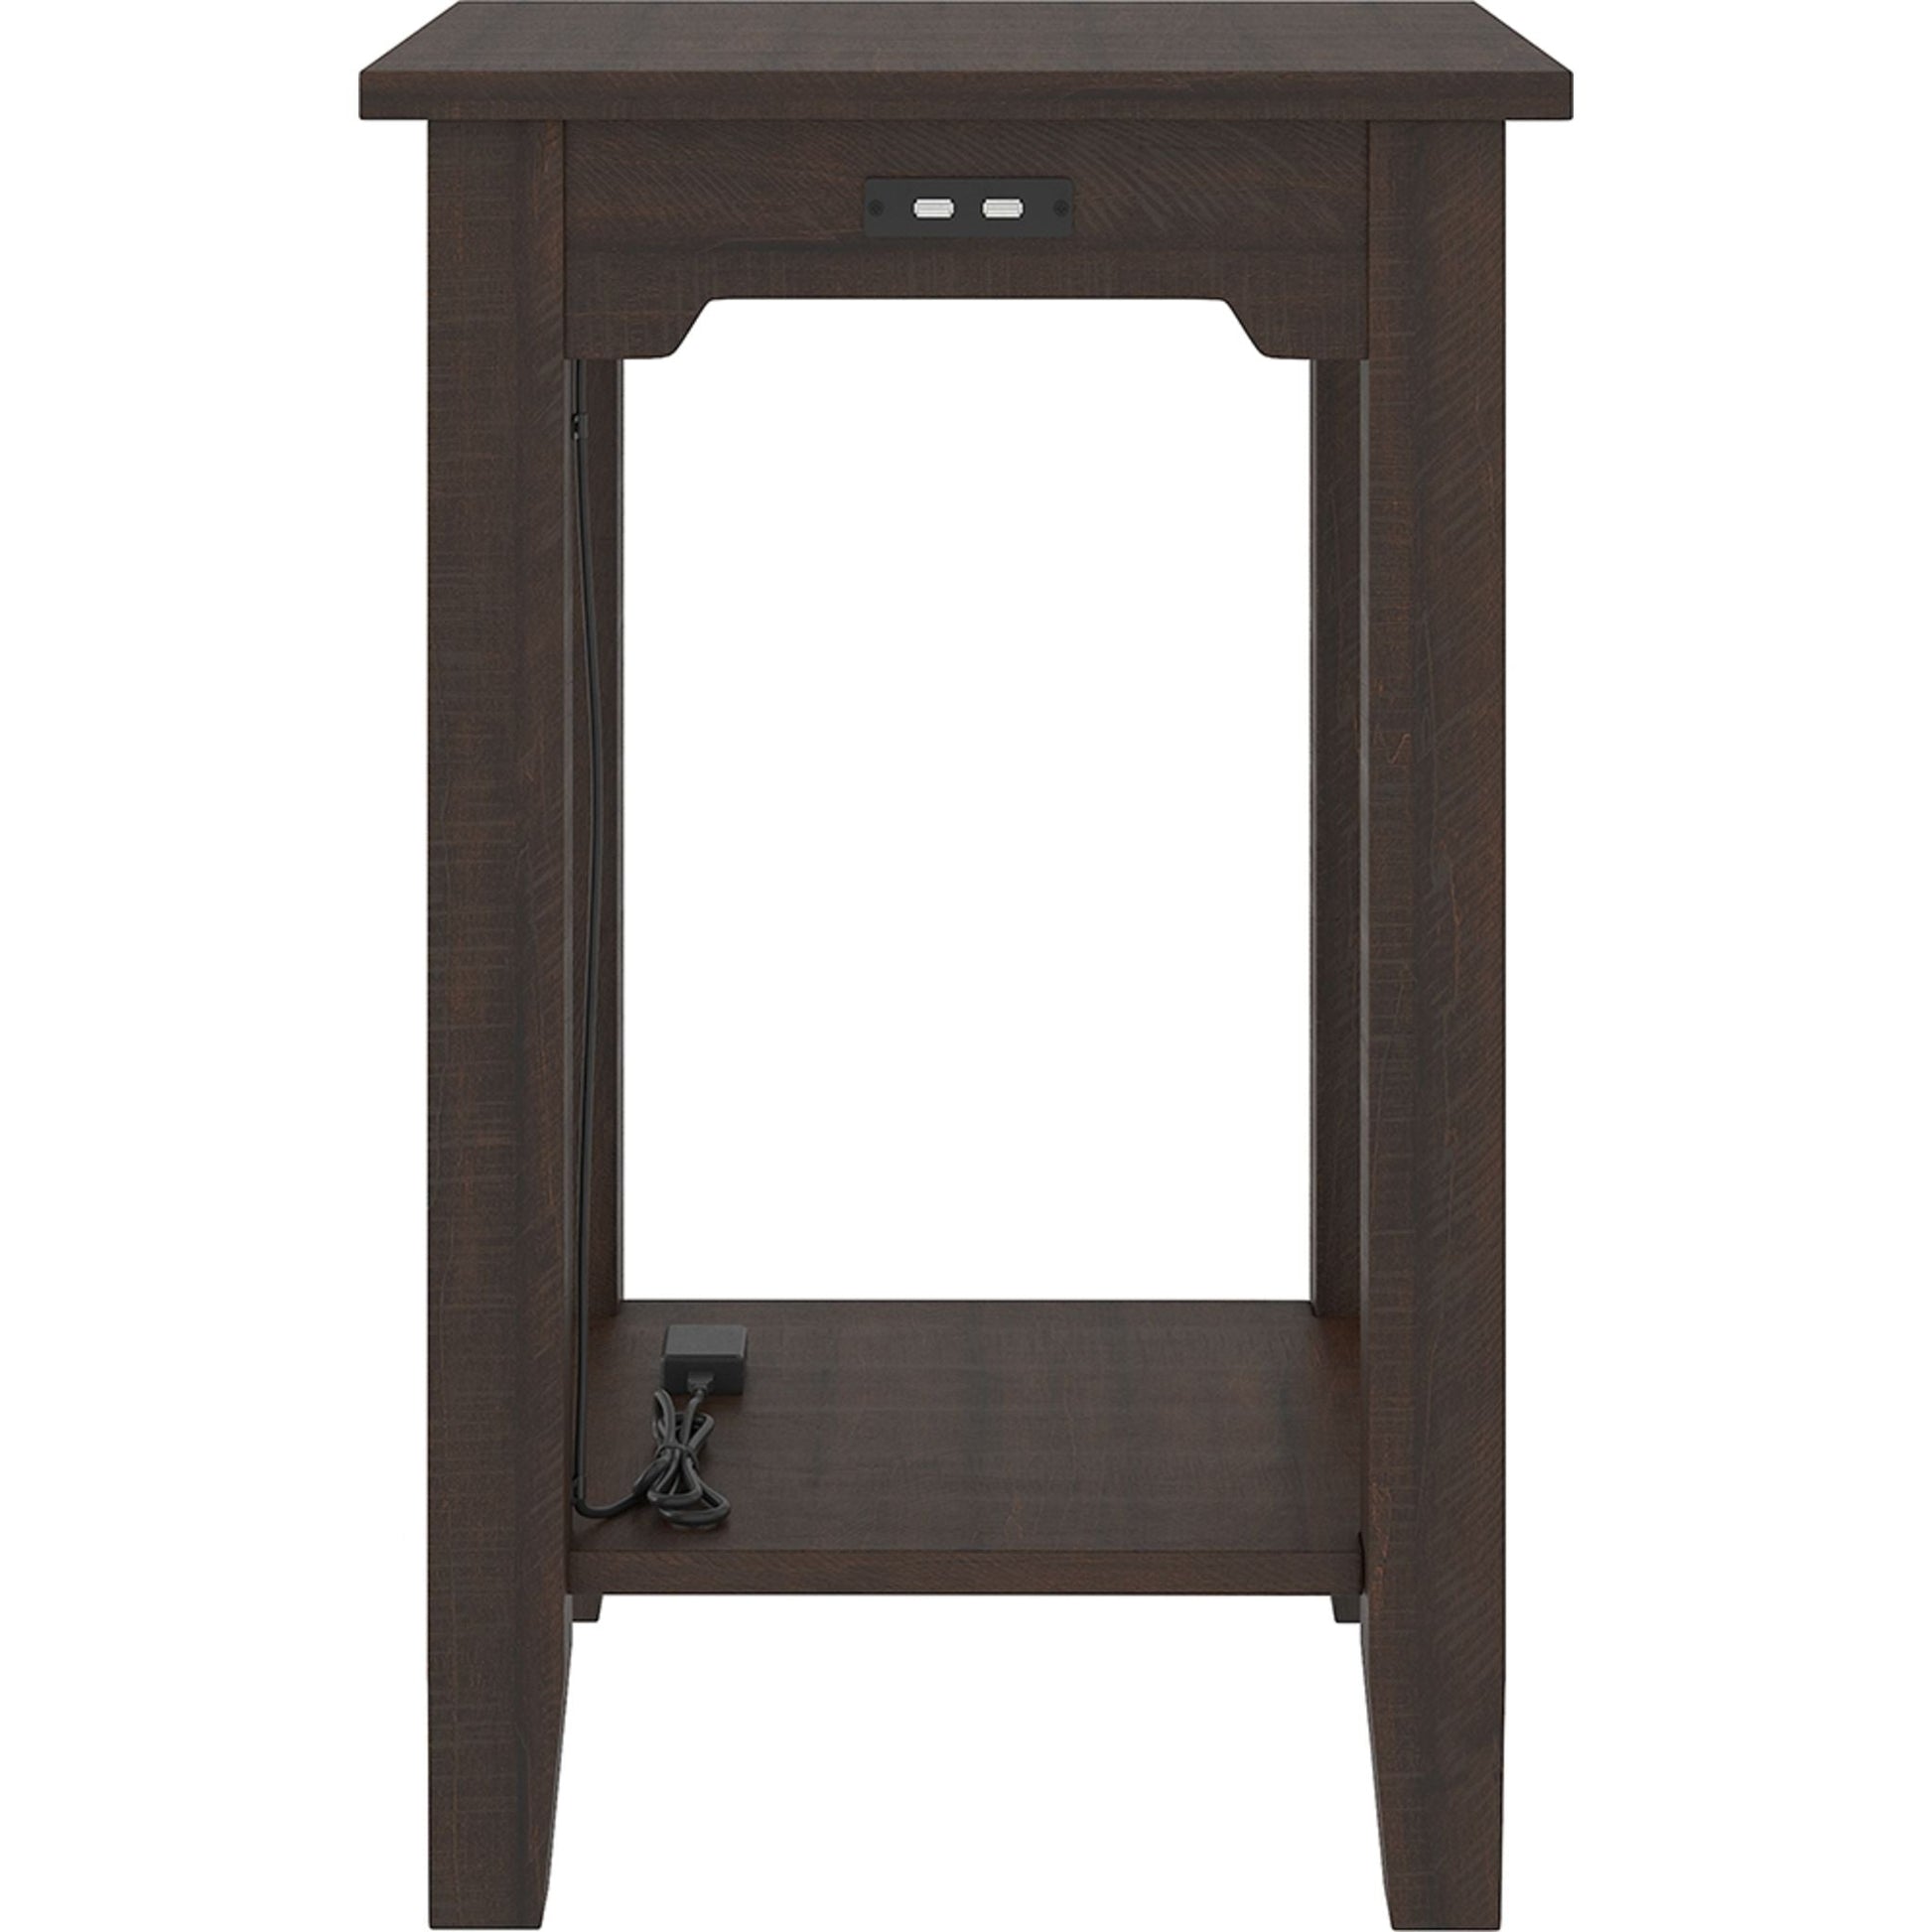 Camiburg Chair Side End Table - Warm Brown